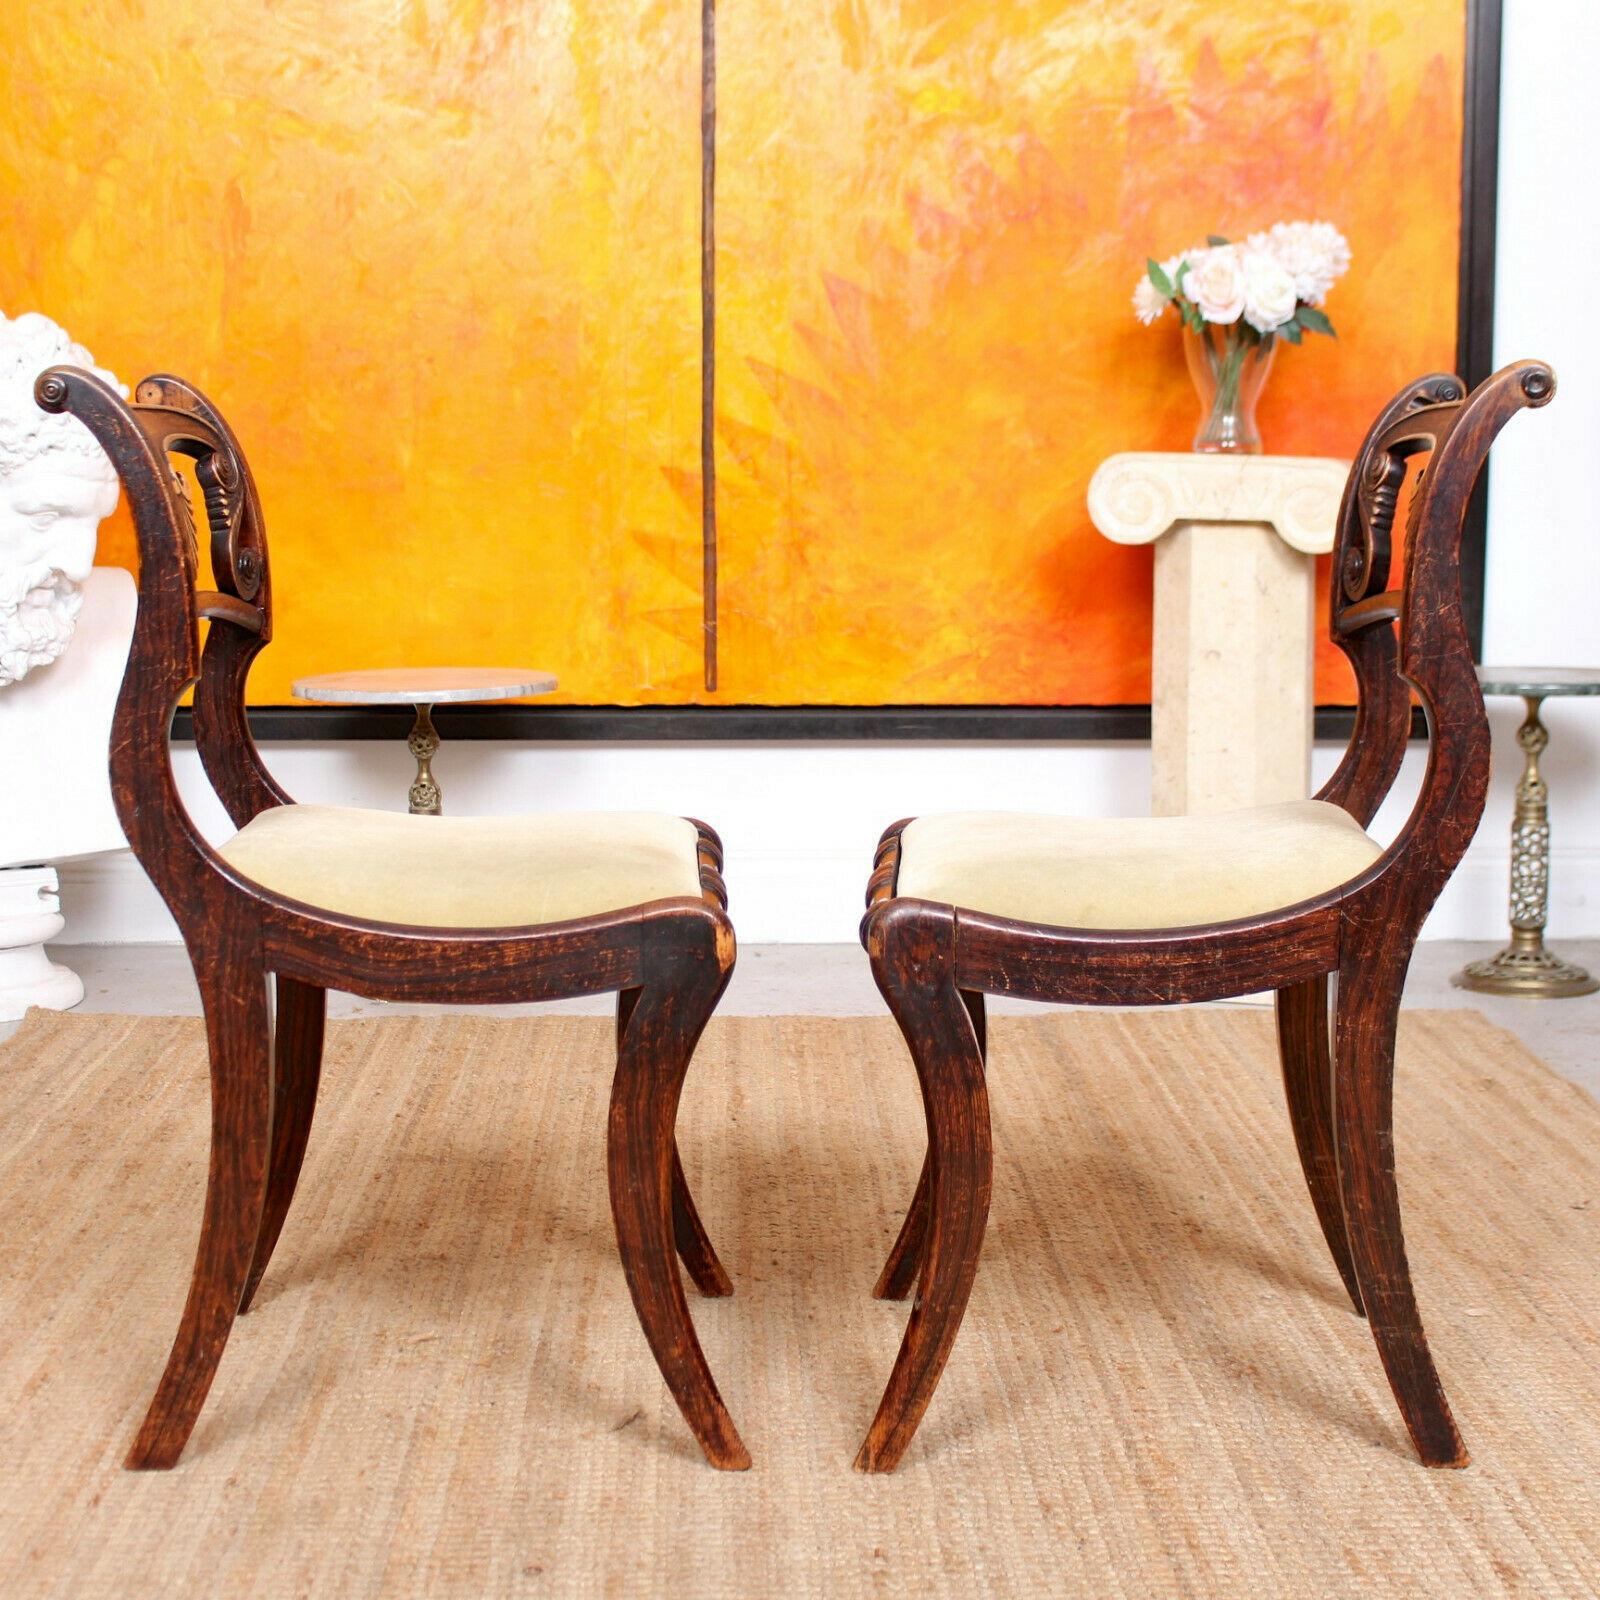 6 Regency Dining Chairs Harlequin Painted Rosewood Carved For Sale 2